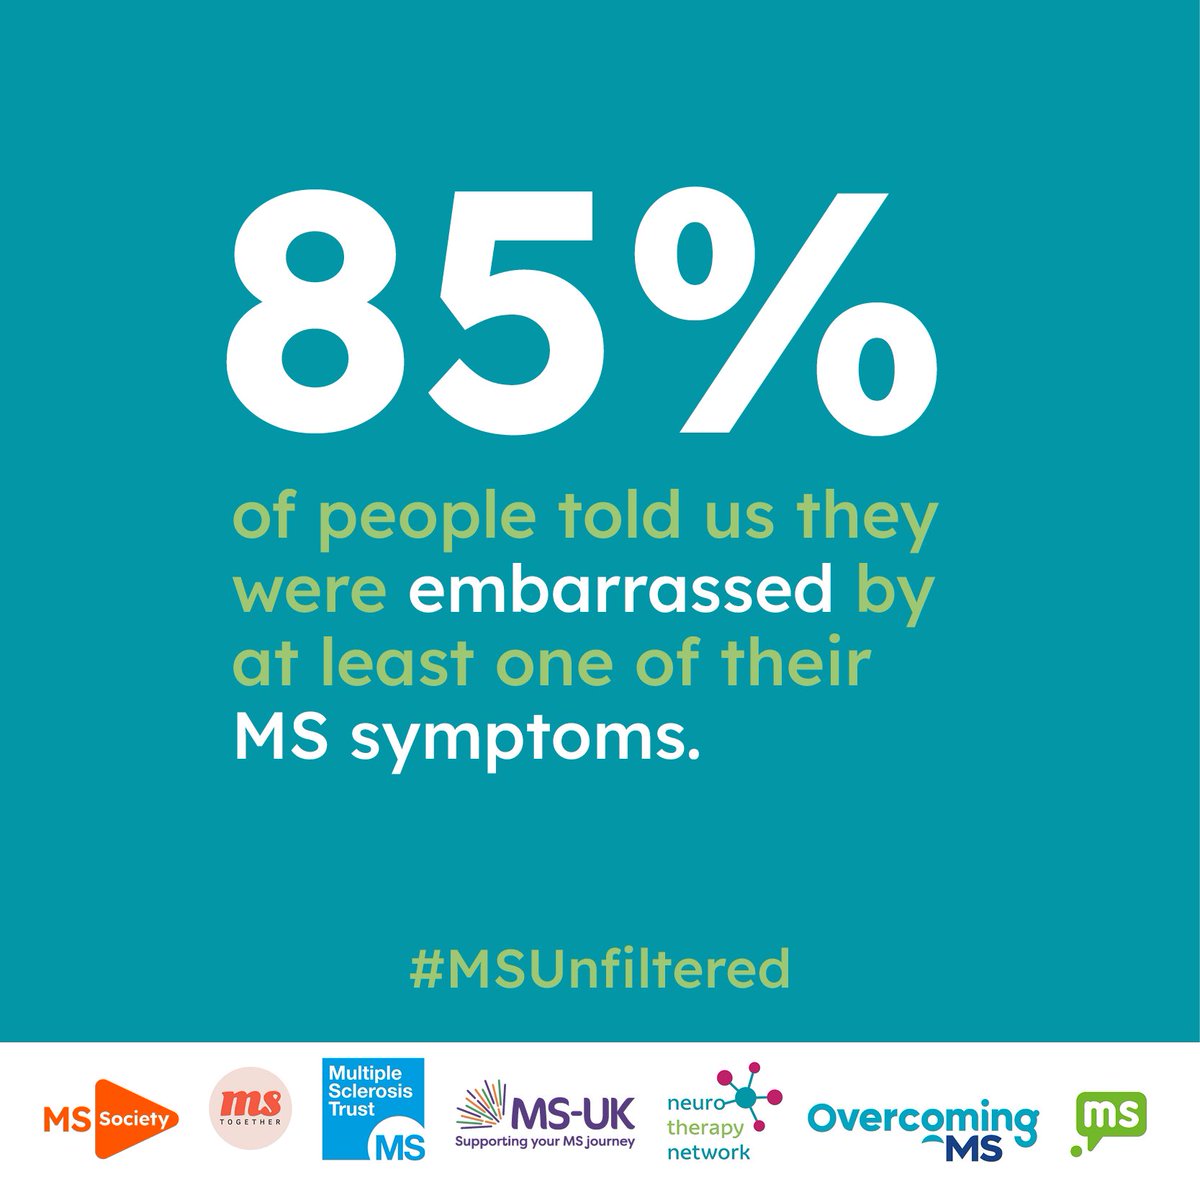 It’s #MSAwarenessWeek and we are launching #MSUnfiltered a campaign to help break the stigma of MS symptoms that many people find difficult to talk about. No one should feel embarrassed about their symptoms or avoid seeking help.